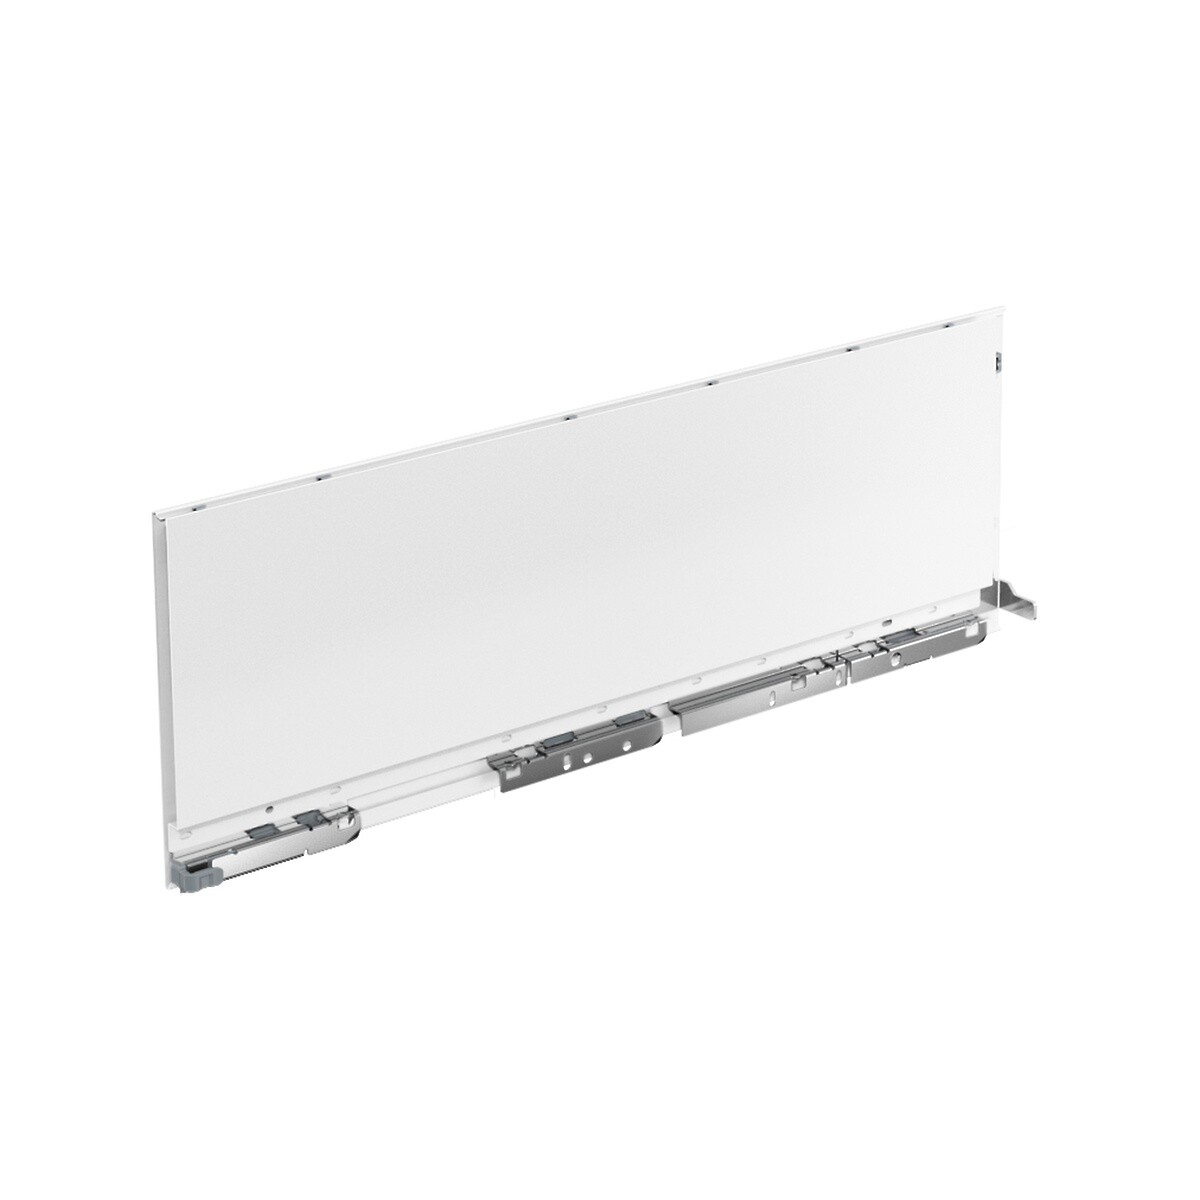 AvanTech YOU Drawer side profile, height 187 mm x NL 350 mm, White, Right